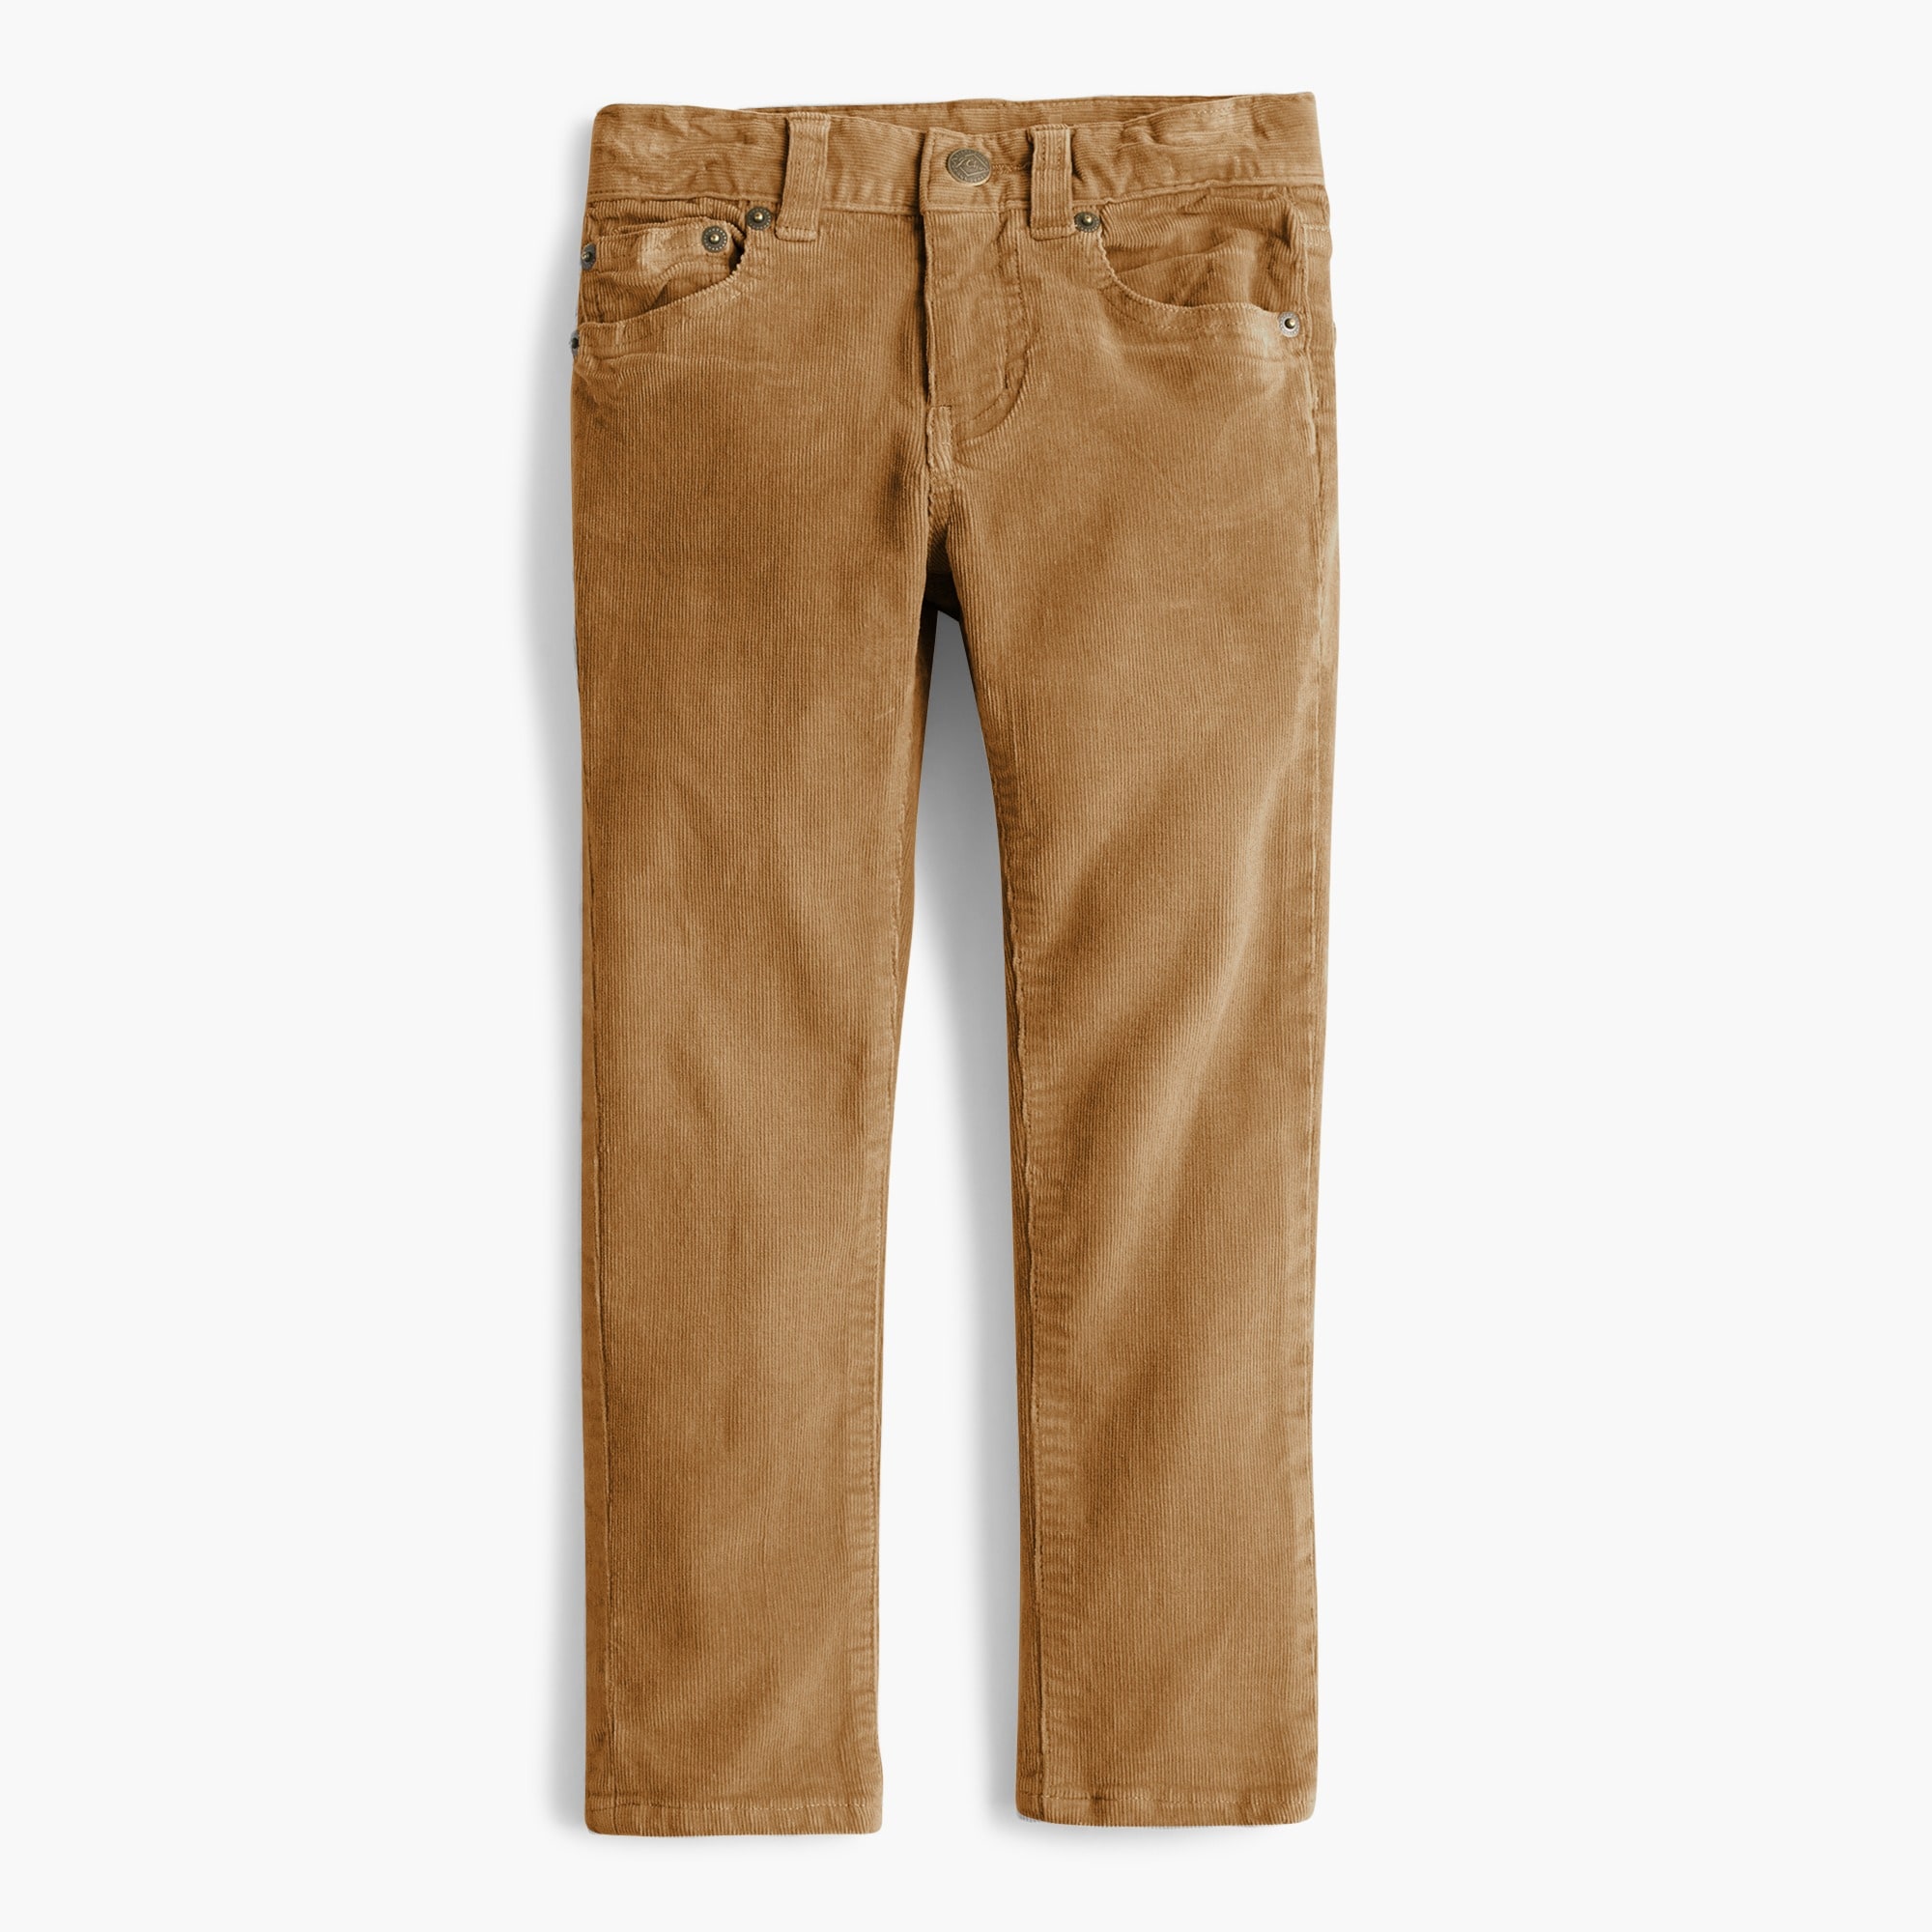 Boys' Gifts: Holiday Gift Guide | J.Crew